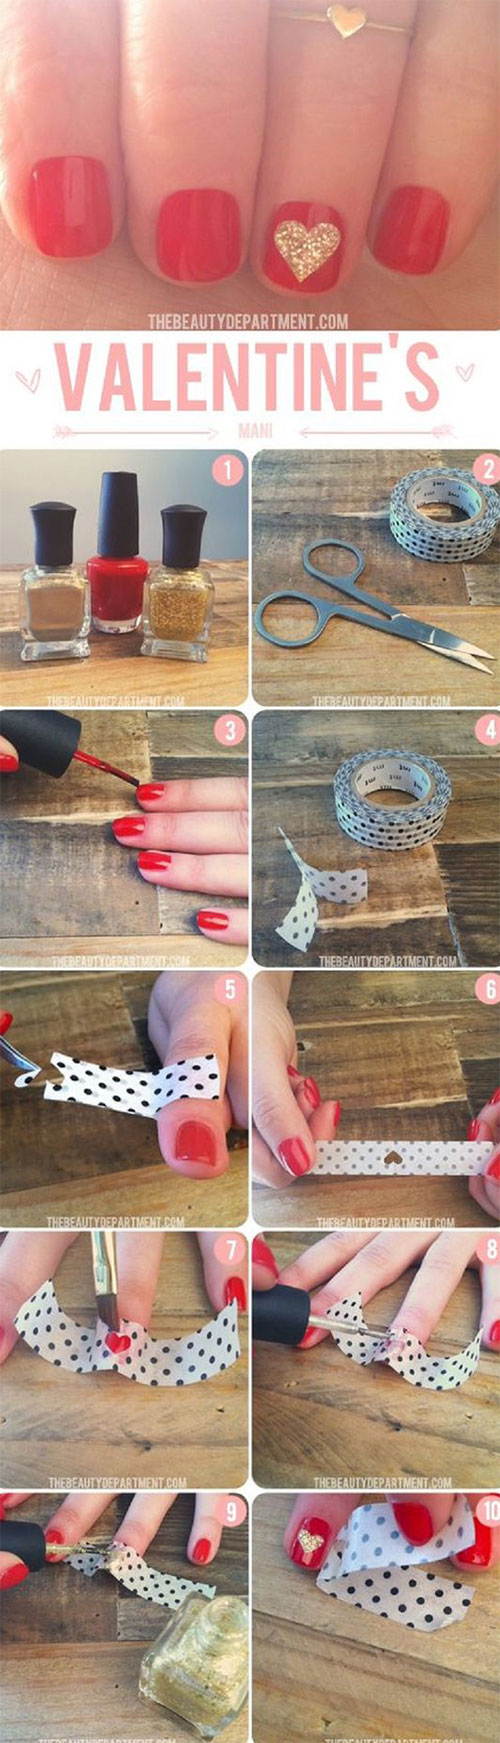 15-Step-By-Step-Valentines-Day-Nail-Art-Tutorials-For-Beginners-2016-7